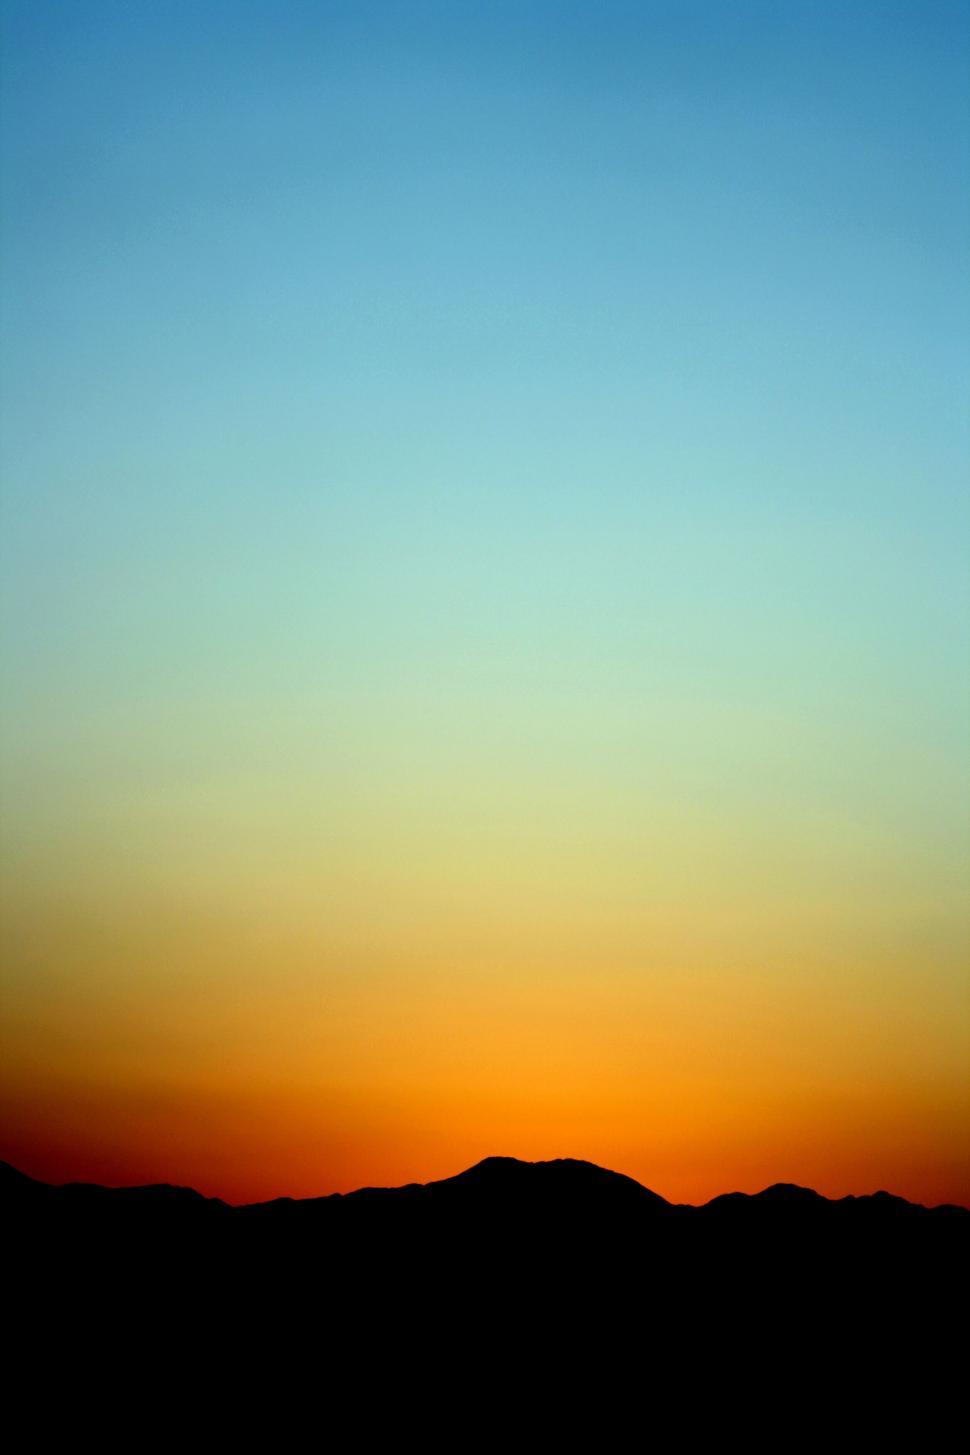 Free Image of Gradient sunset sky over silhouette mountains 